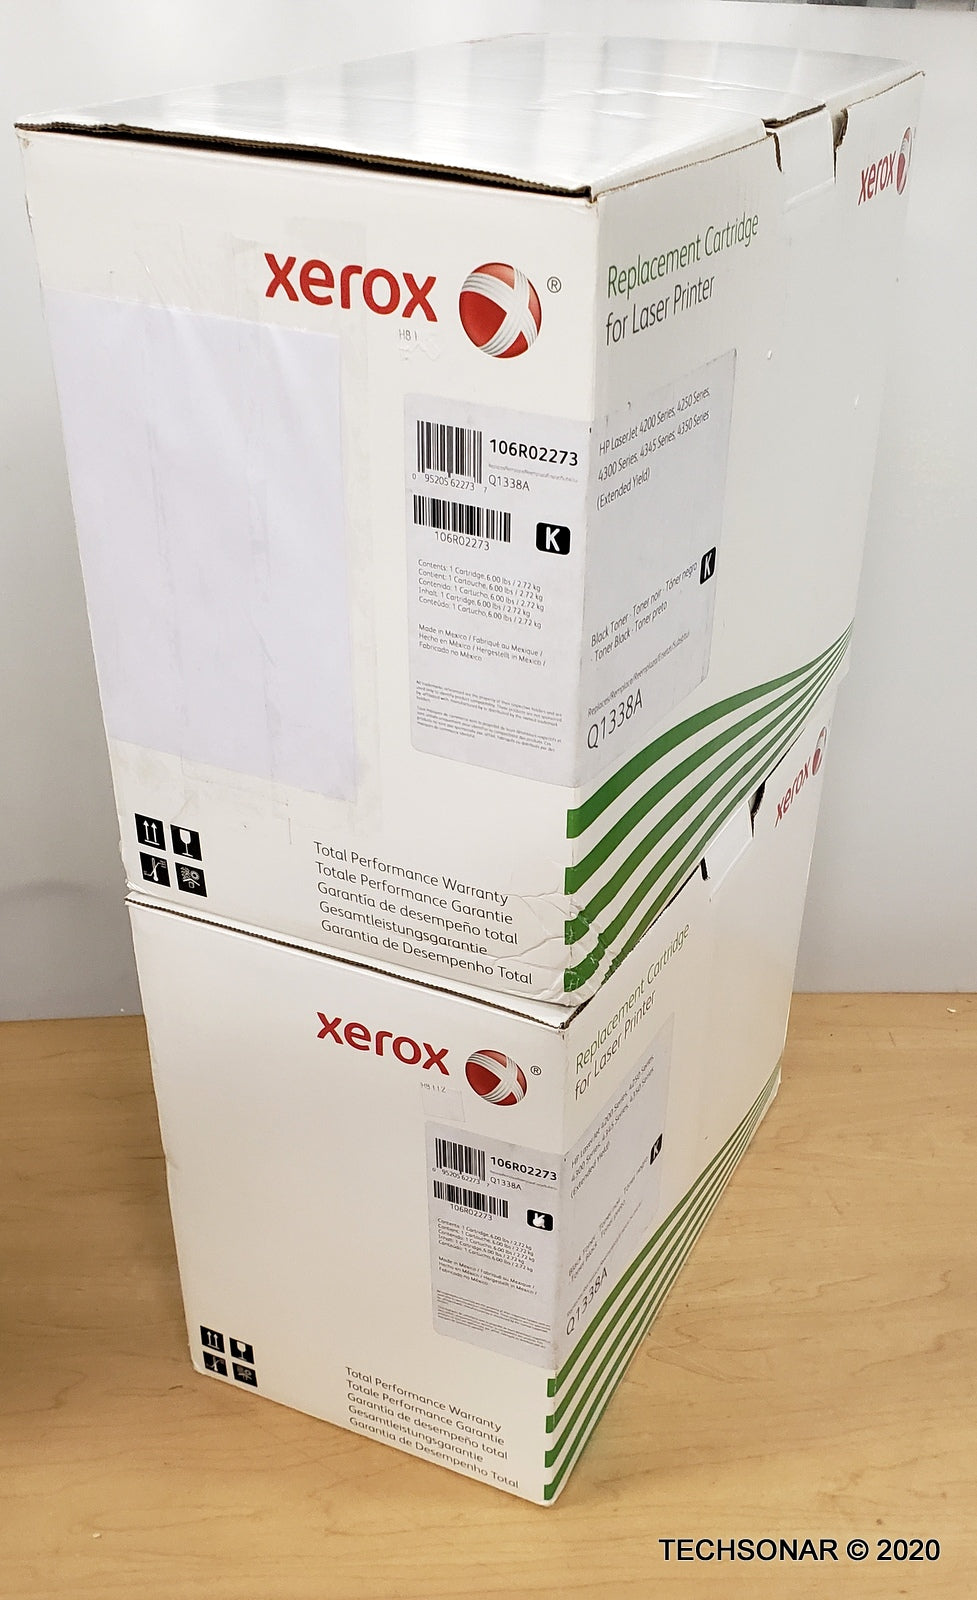 Lot of 2 Xerox 106R02273 for Q1338A  Black Toner for HP Printers EXTENDED Yield